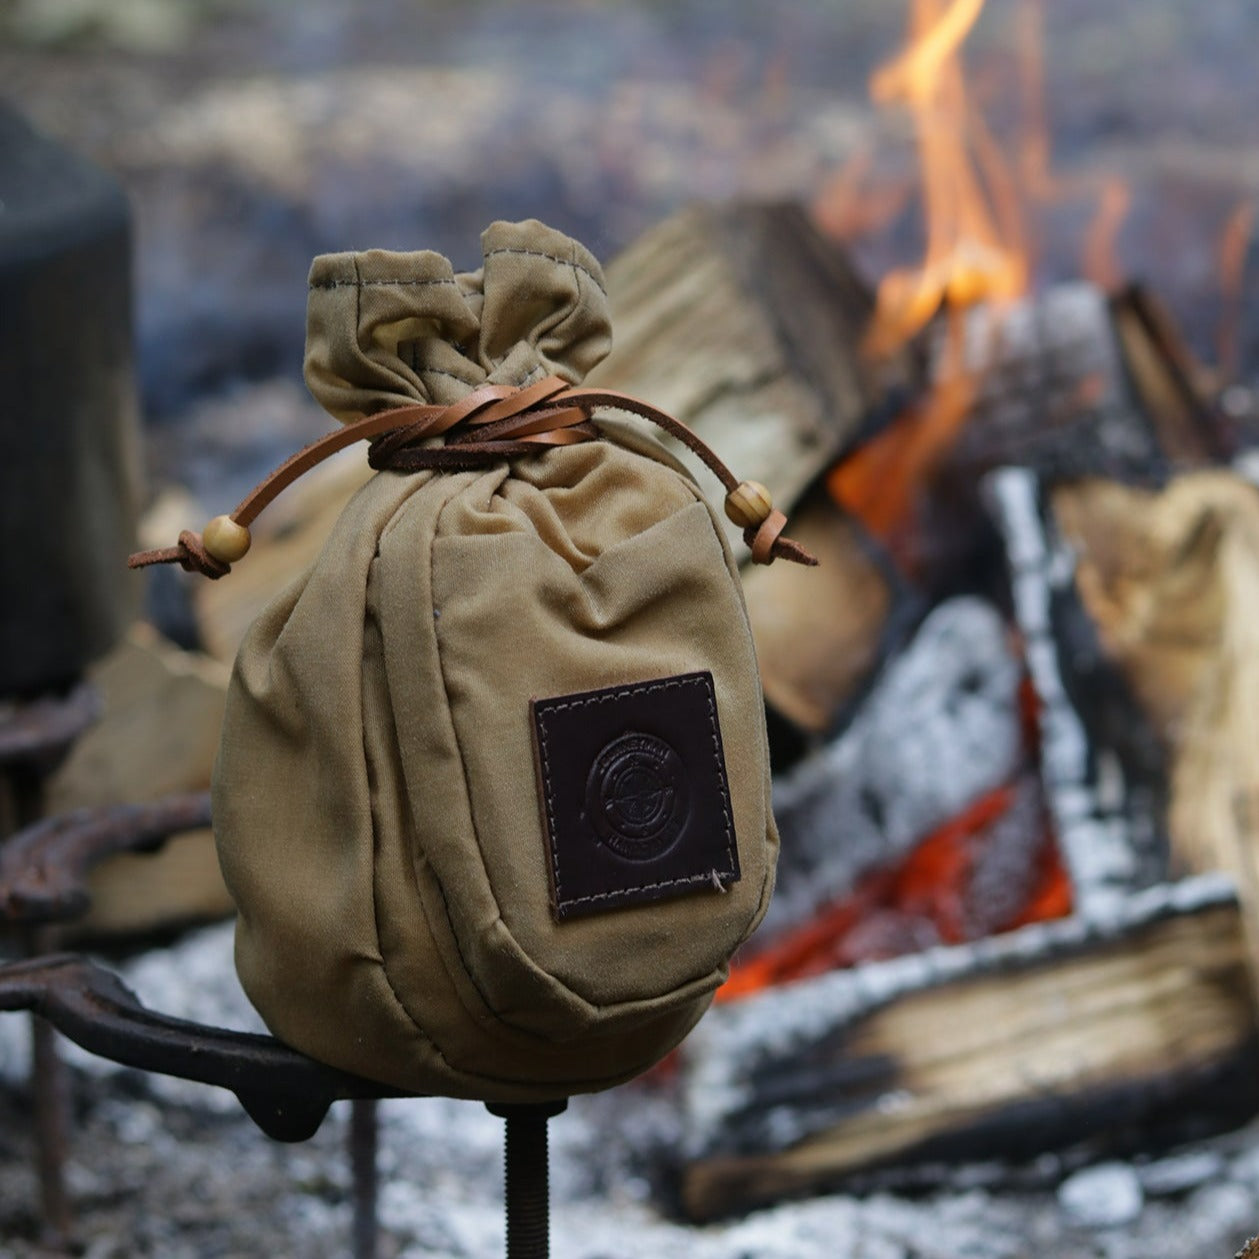 A traditional wax canvas coffee pouch by the campfire